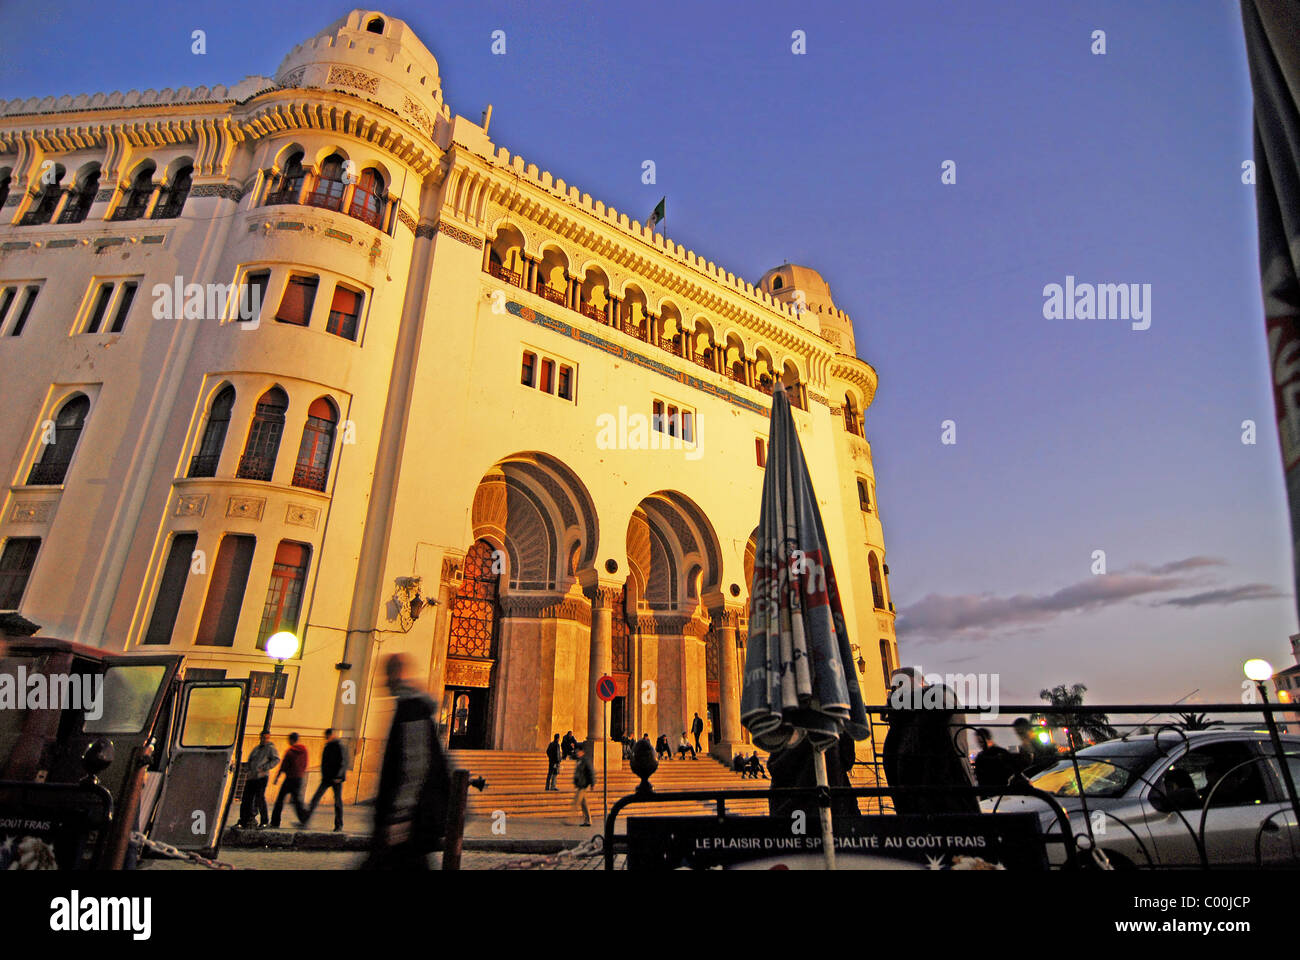 Algeria, Alger, low angle view of people by post office building against sky at dusk Stock Photo